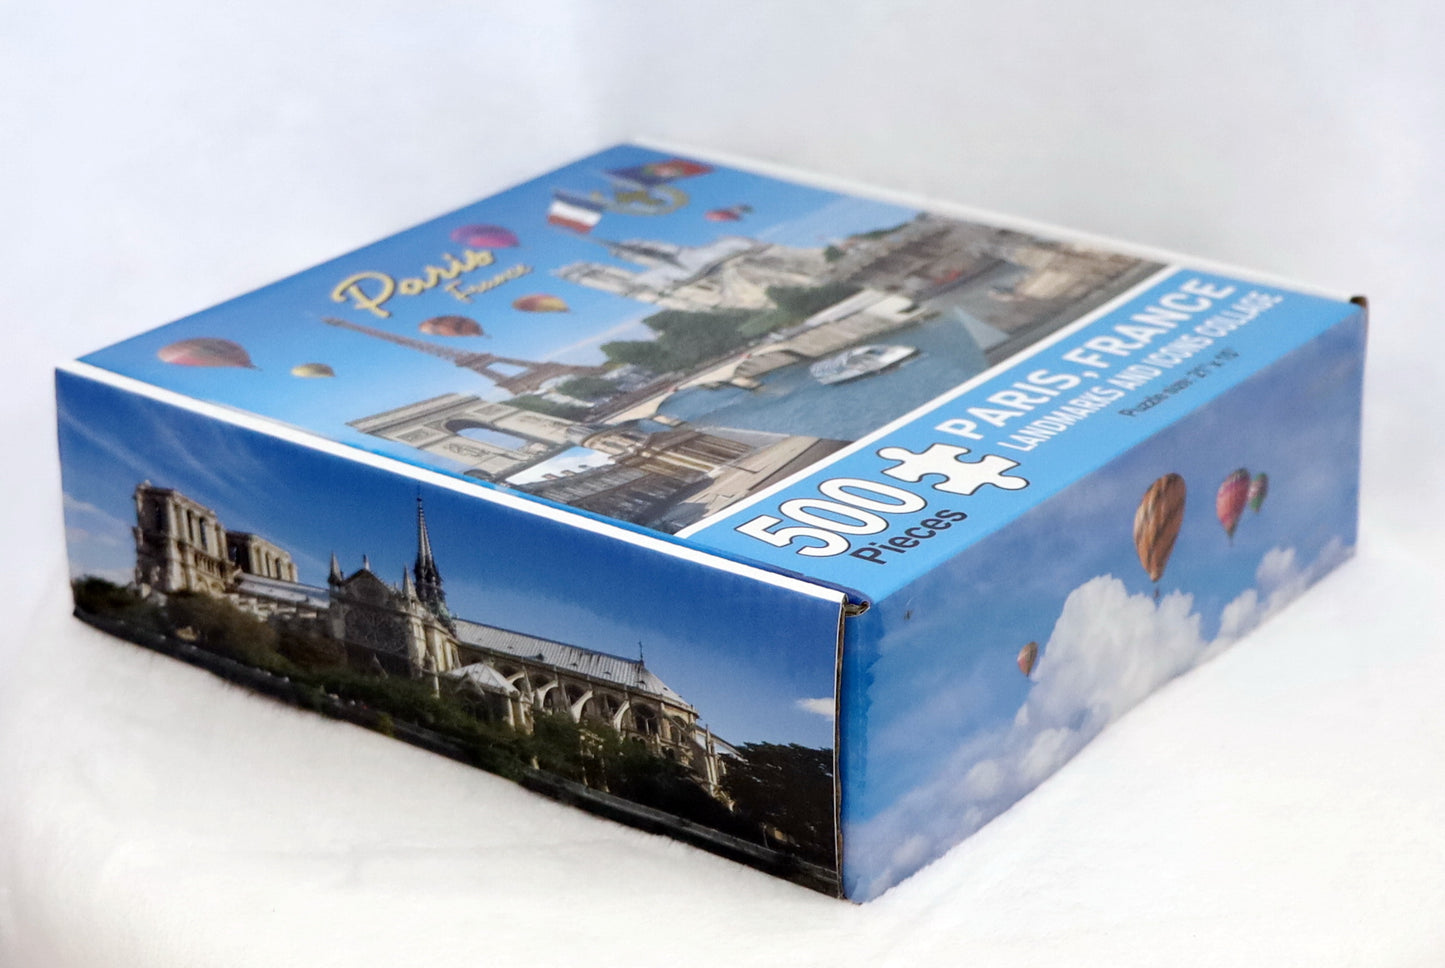 Paris France Landmarks and Icons Collage Jigsaw Puzzle 500 pcs (21" x 15" when finished)